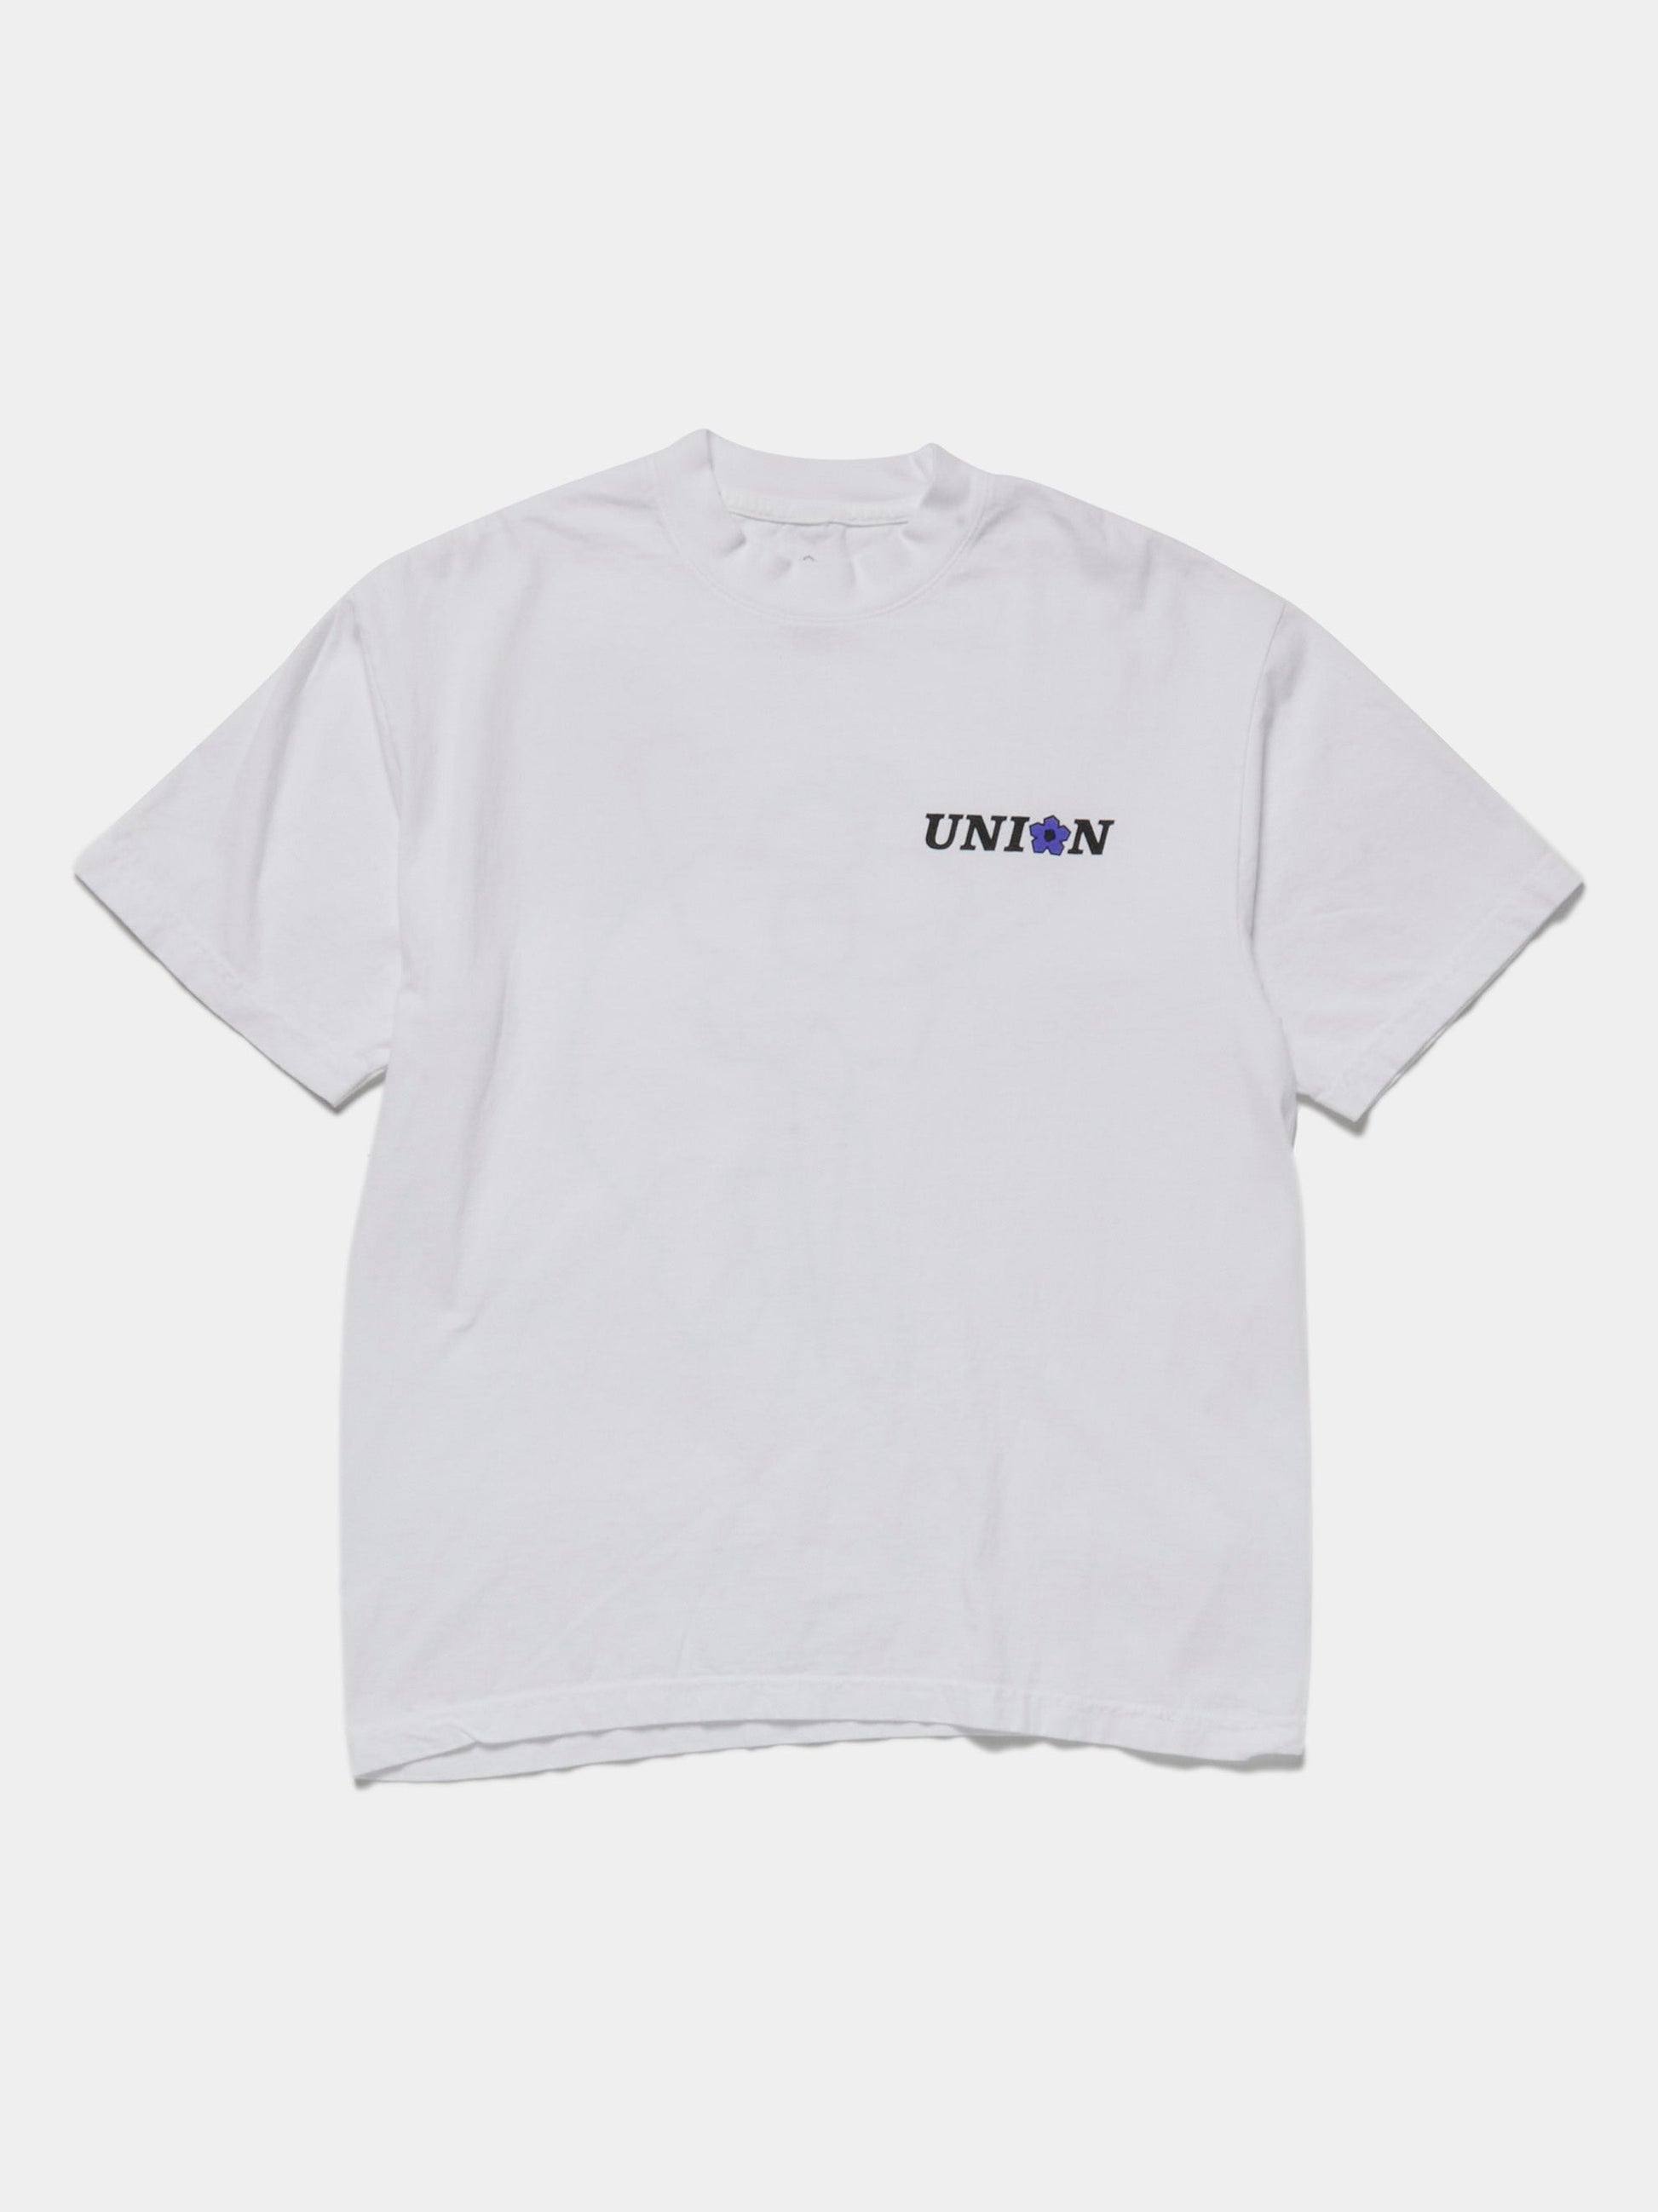 Buy I Don't Have Good Days FRONTMAN FLOWER TEE Online at UNION LOS ANGELES